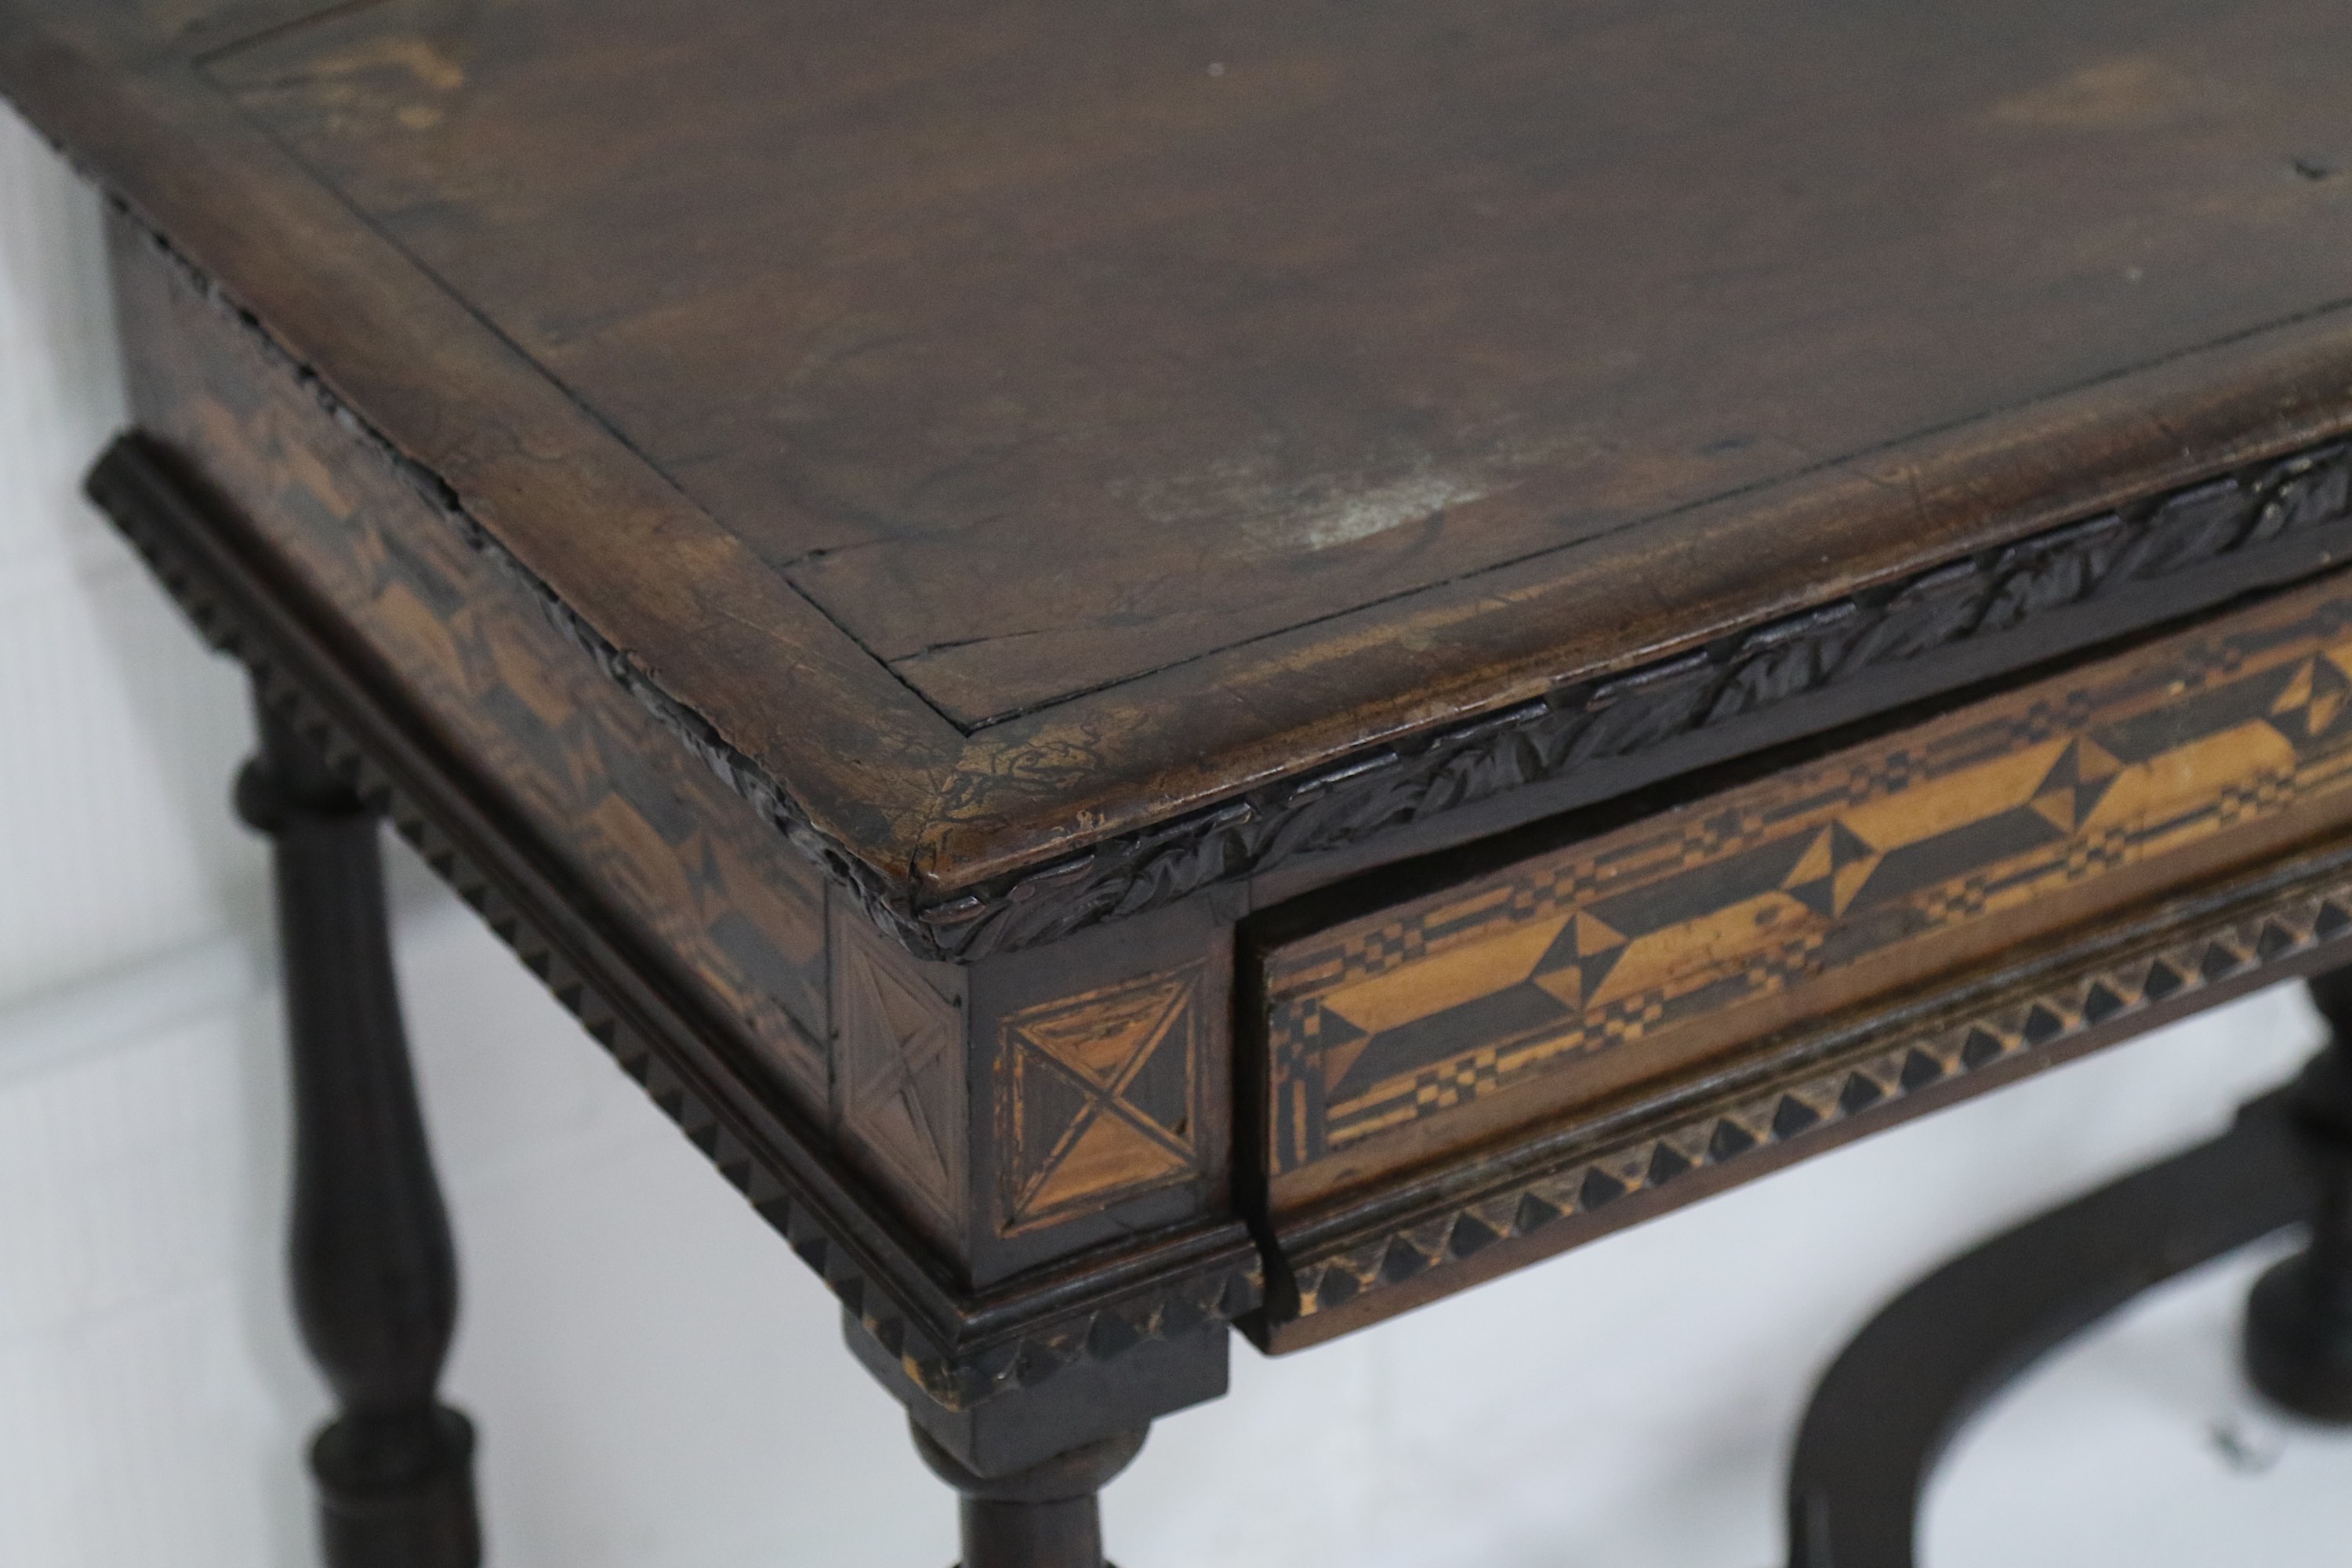 A 17th Century Italian walnut side table, the rectangular top with a carved leaf frieze, over a - Image 2 of 2